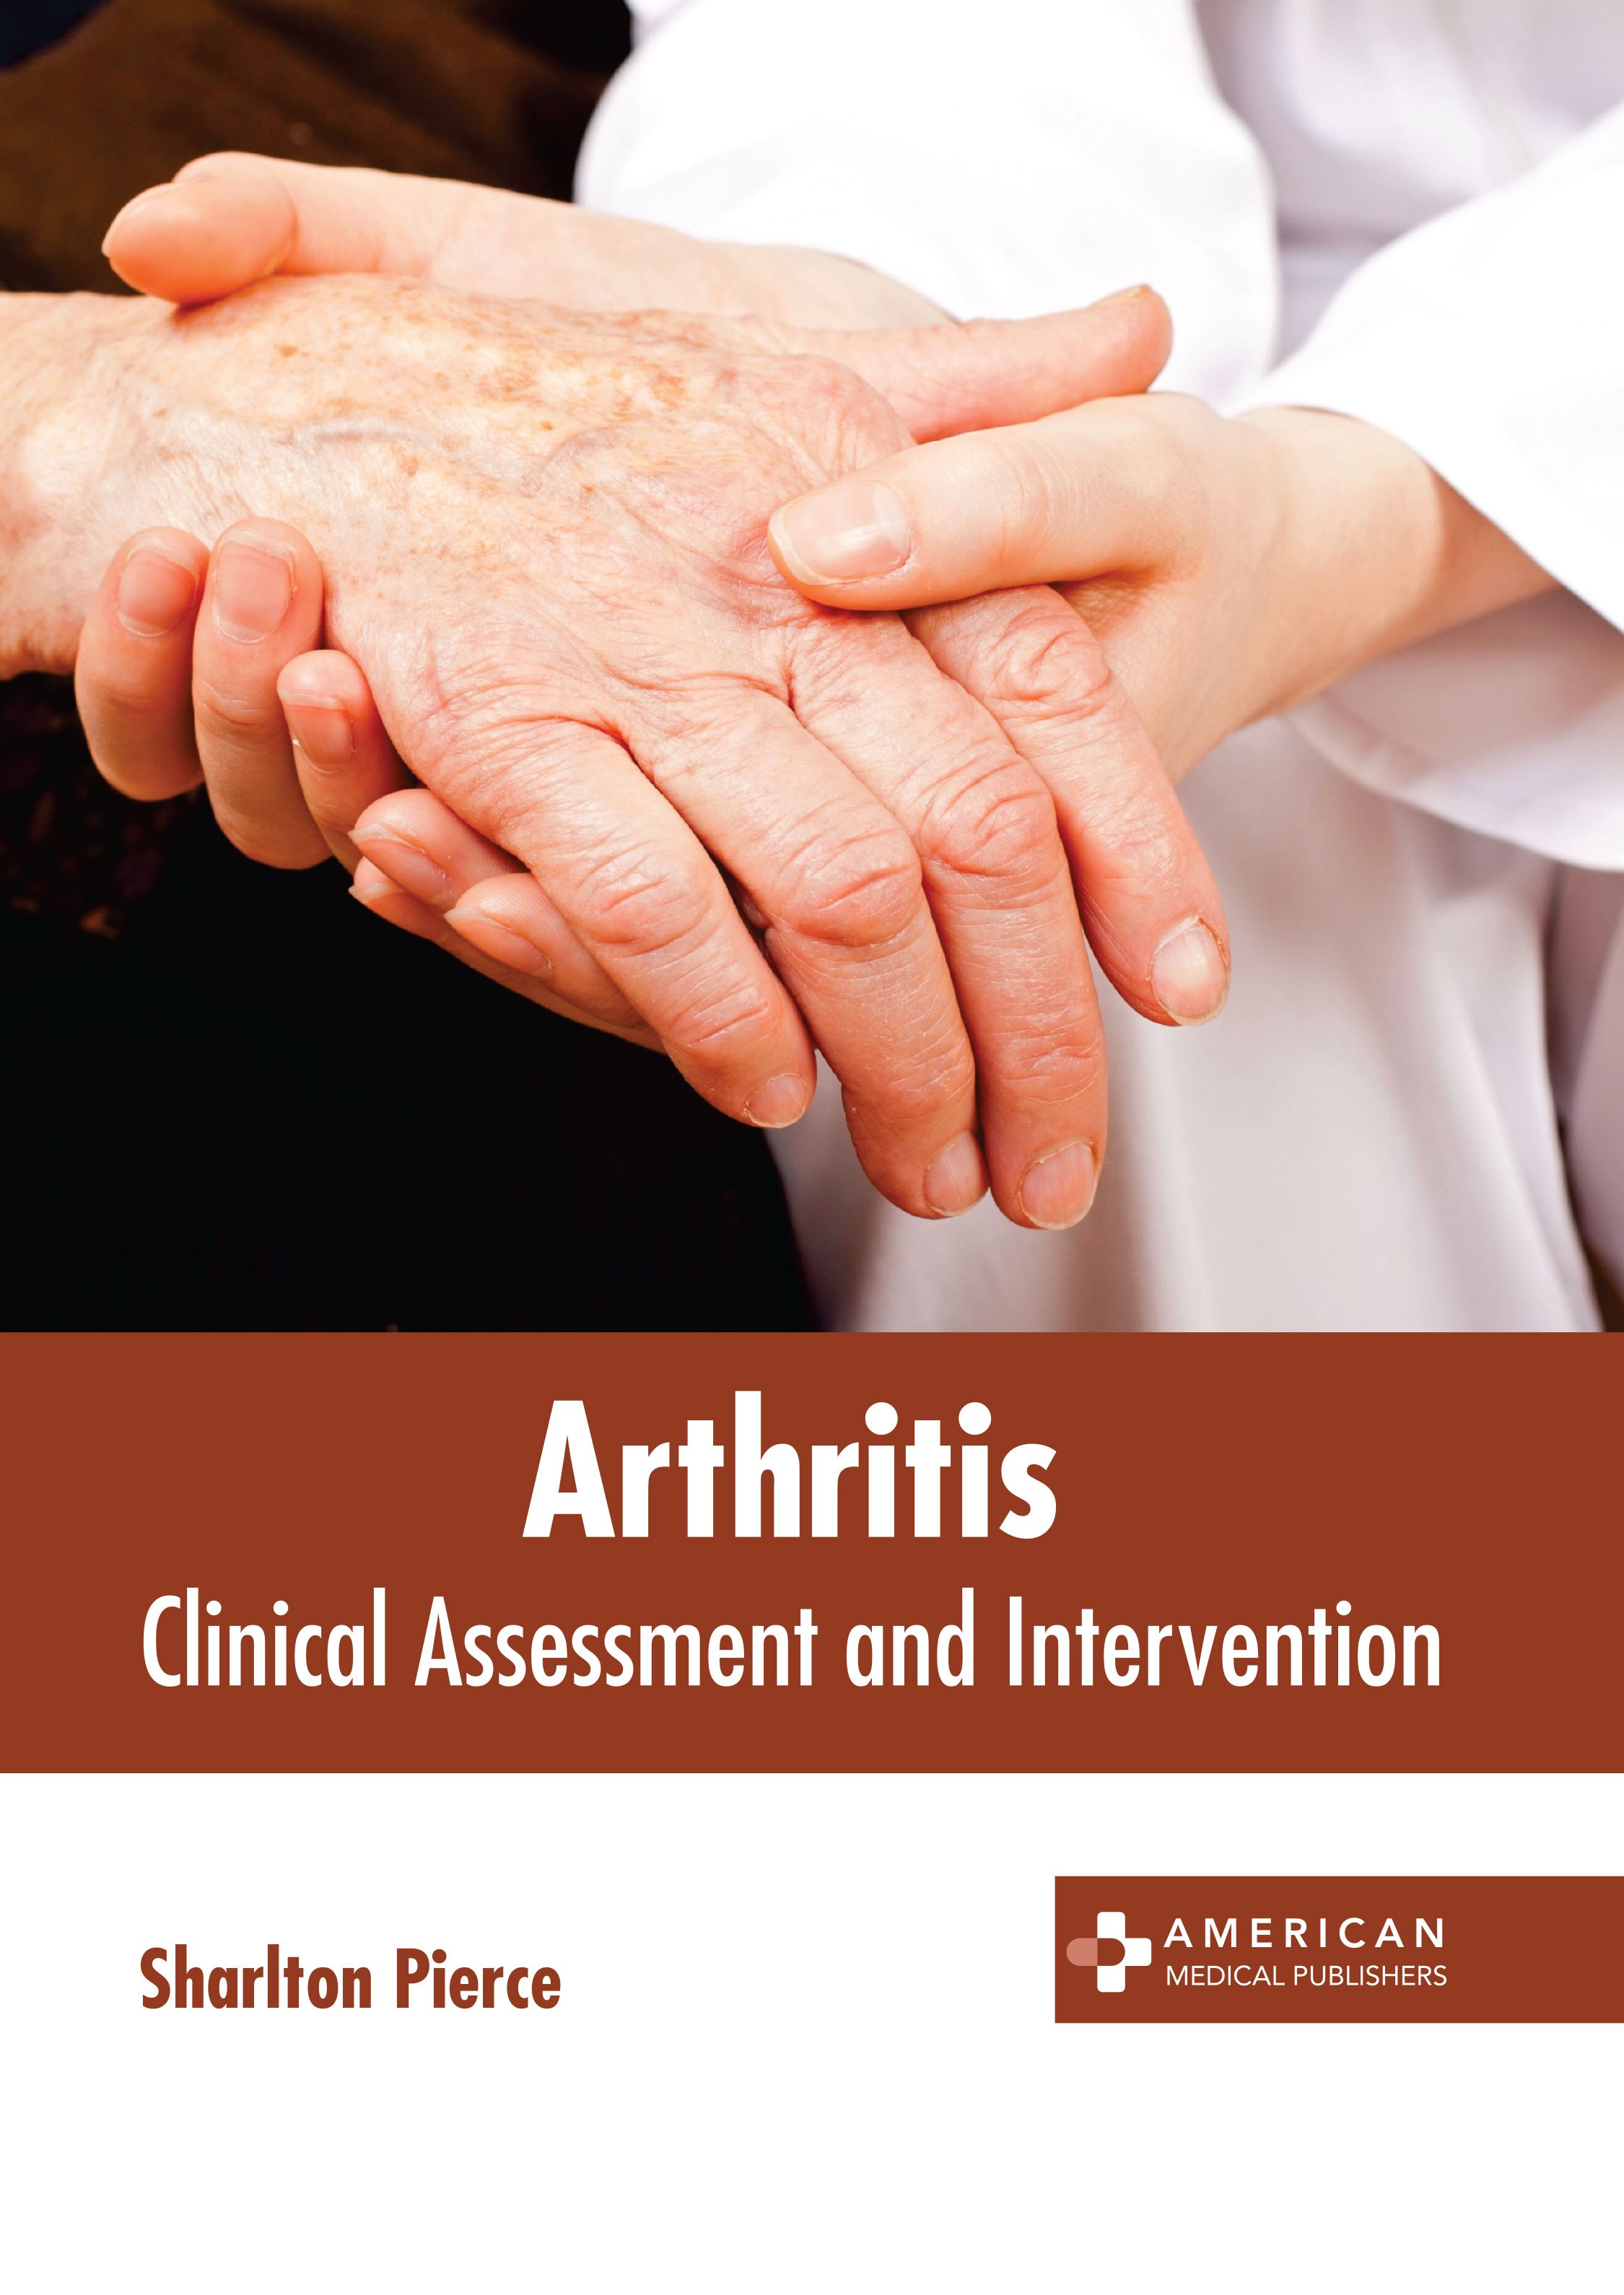 ARTHRITIS: CLINICAL ASSESSMENT AND INTERVENTION